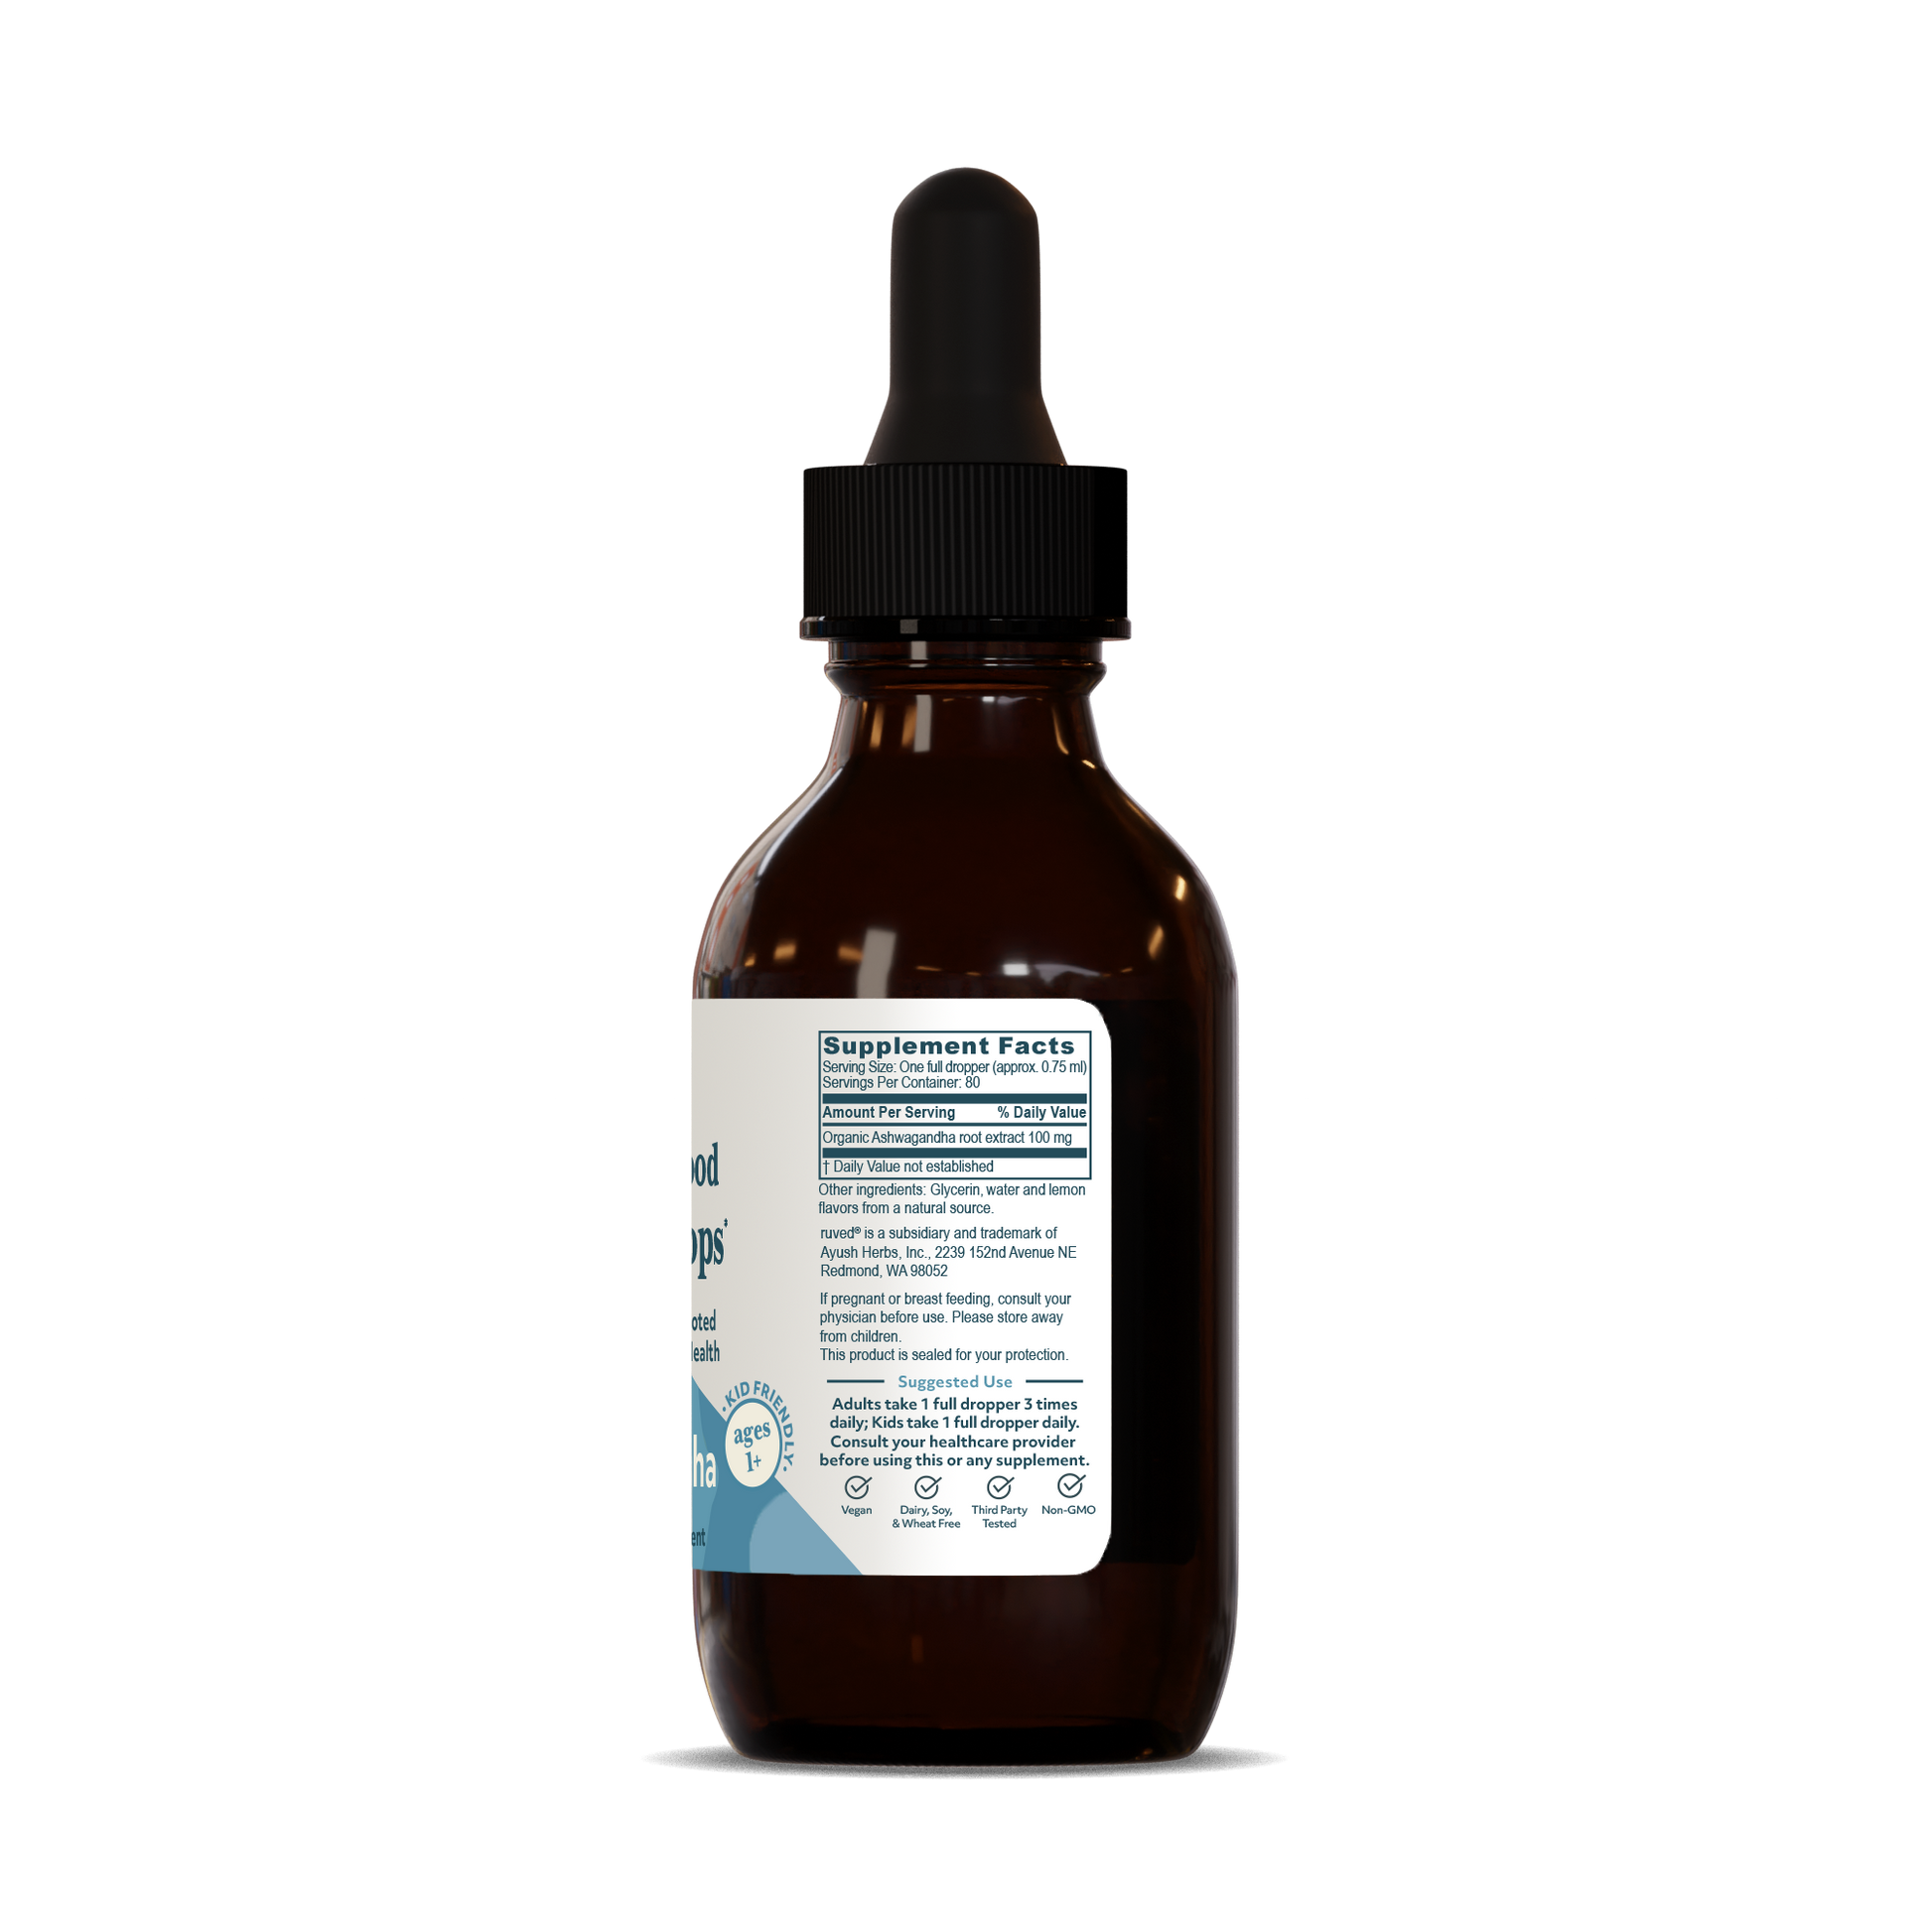 Ashwagandha Drops Supplement Facts Side - Organic Herbal Extract Tincture, 60ml Bottle, Stress Relief and Energy Support.